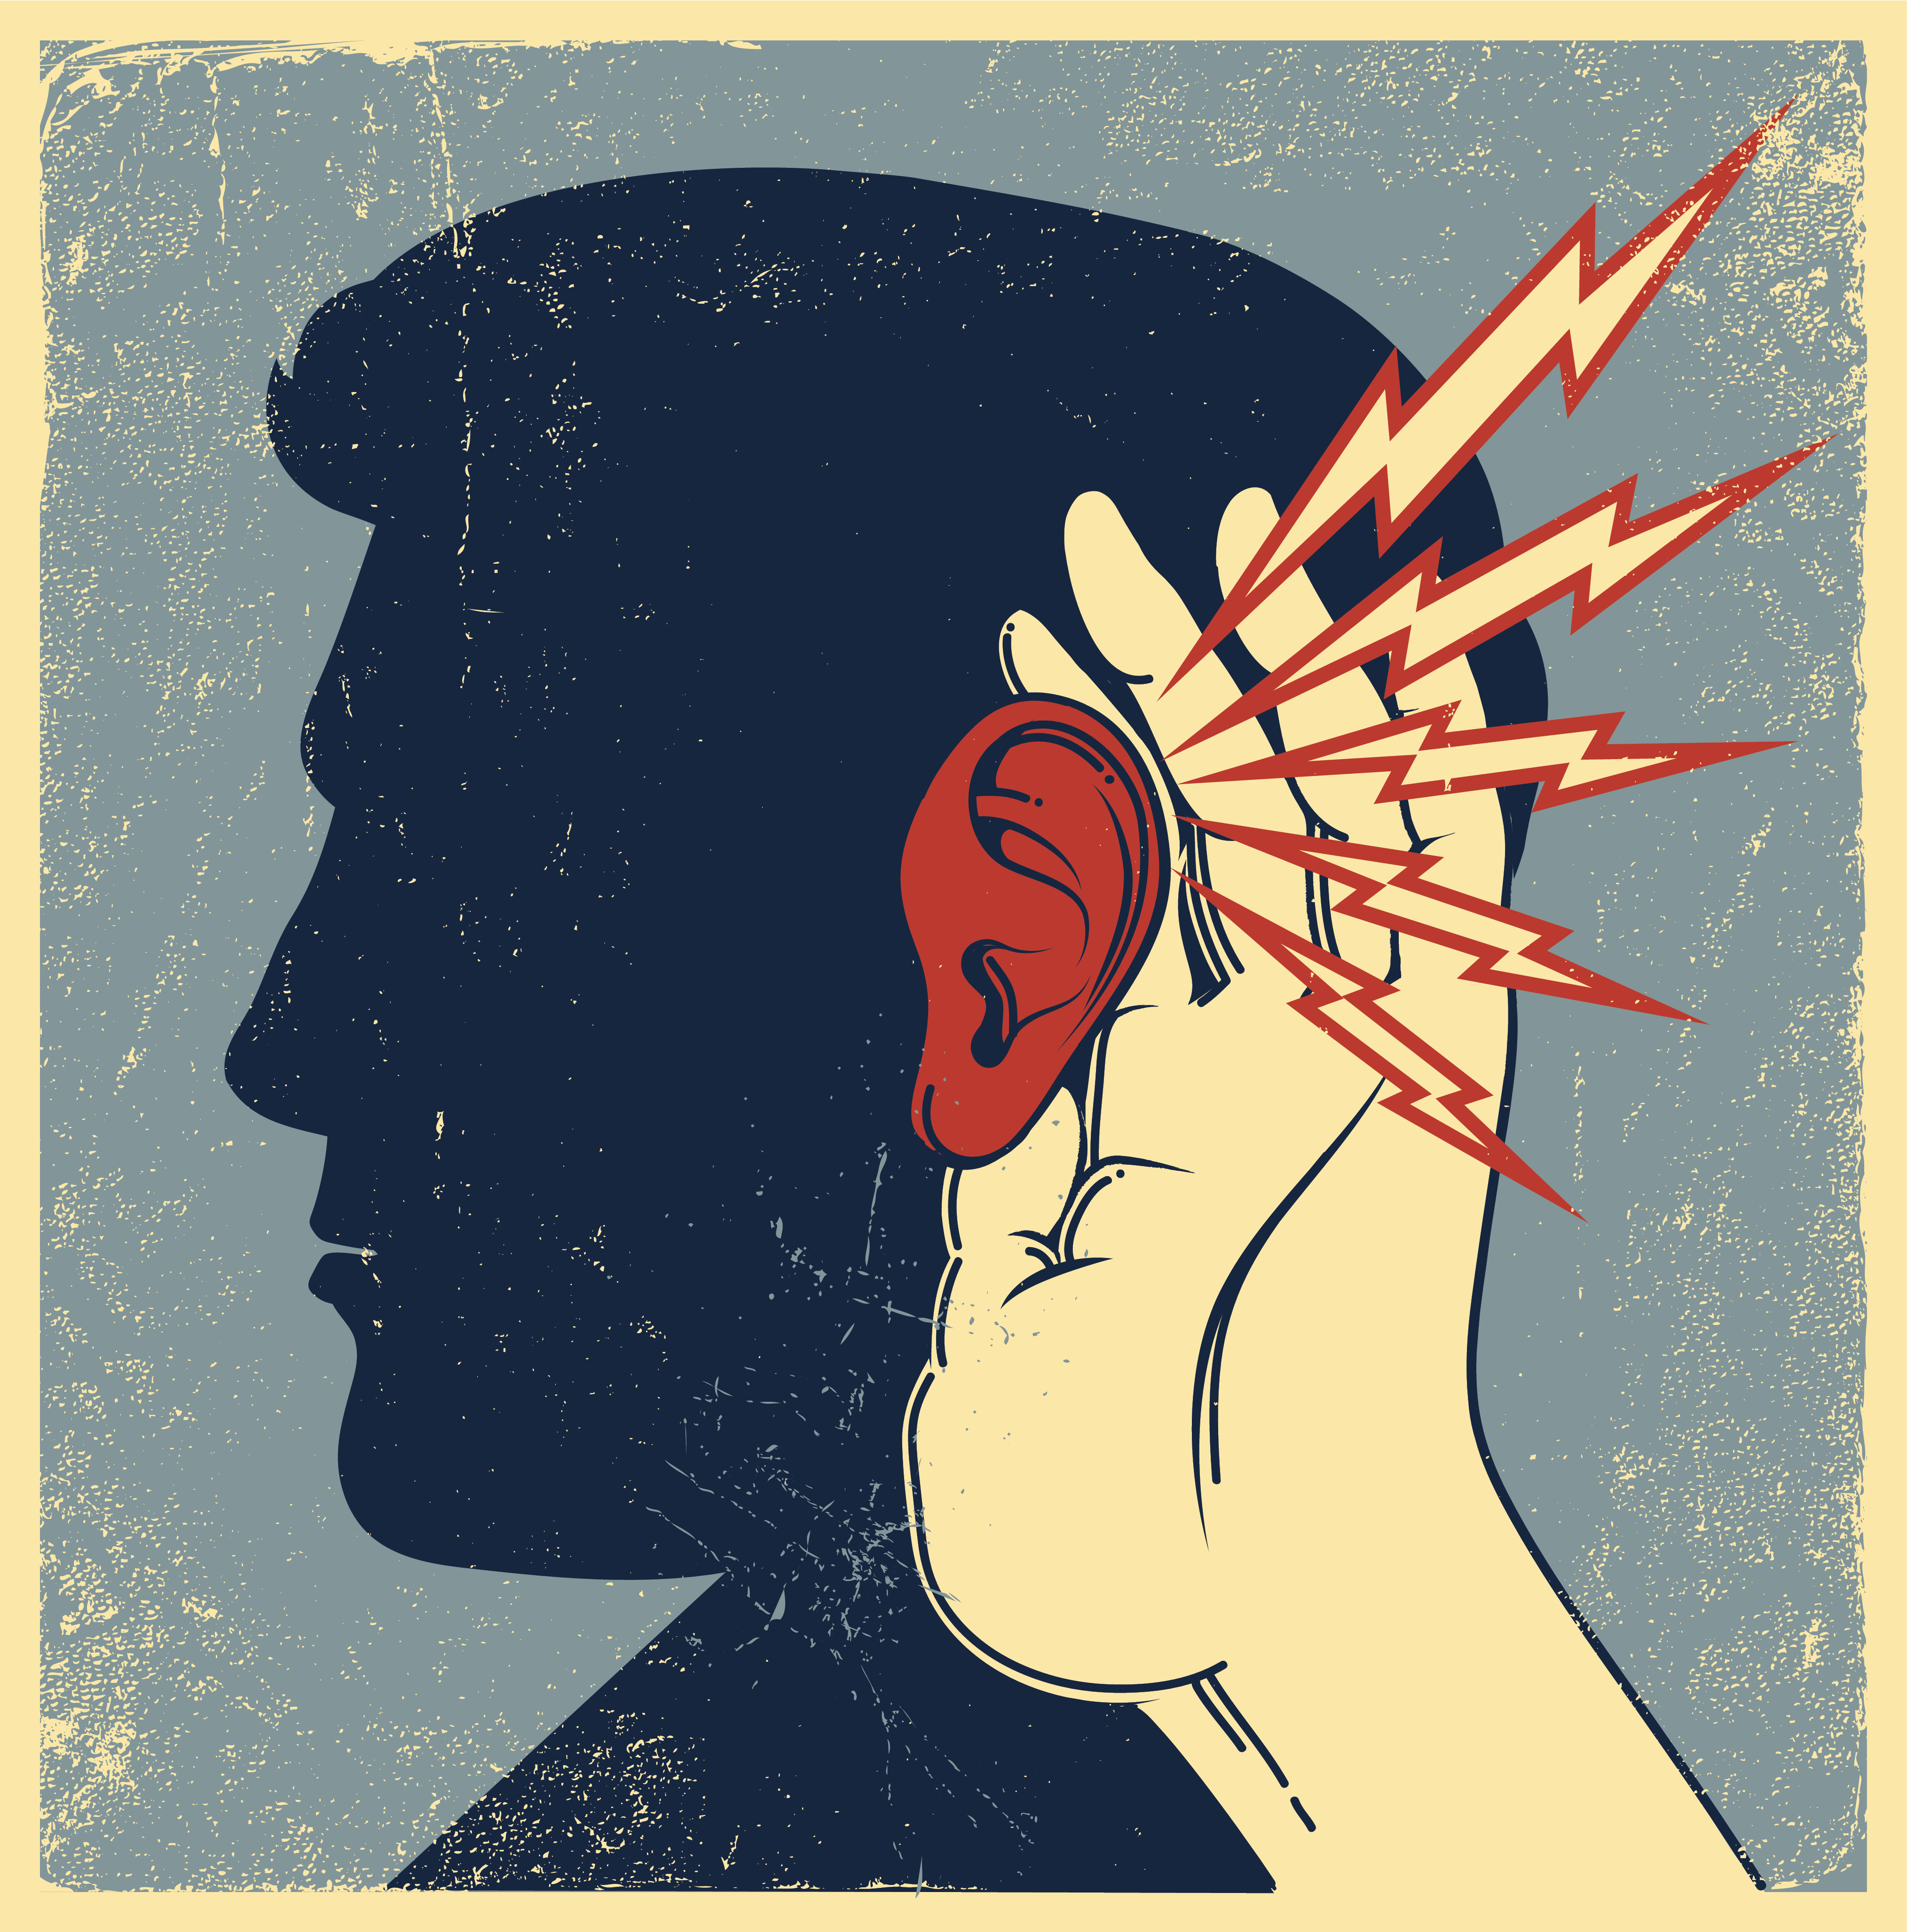 An illustration of a person’s head in silhouette with a hand to the ear and lightning bolts denoting sound causing the ear to turn red.